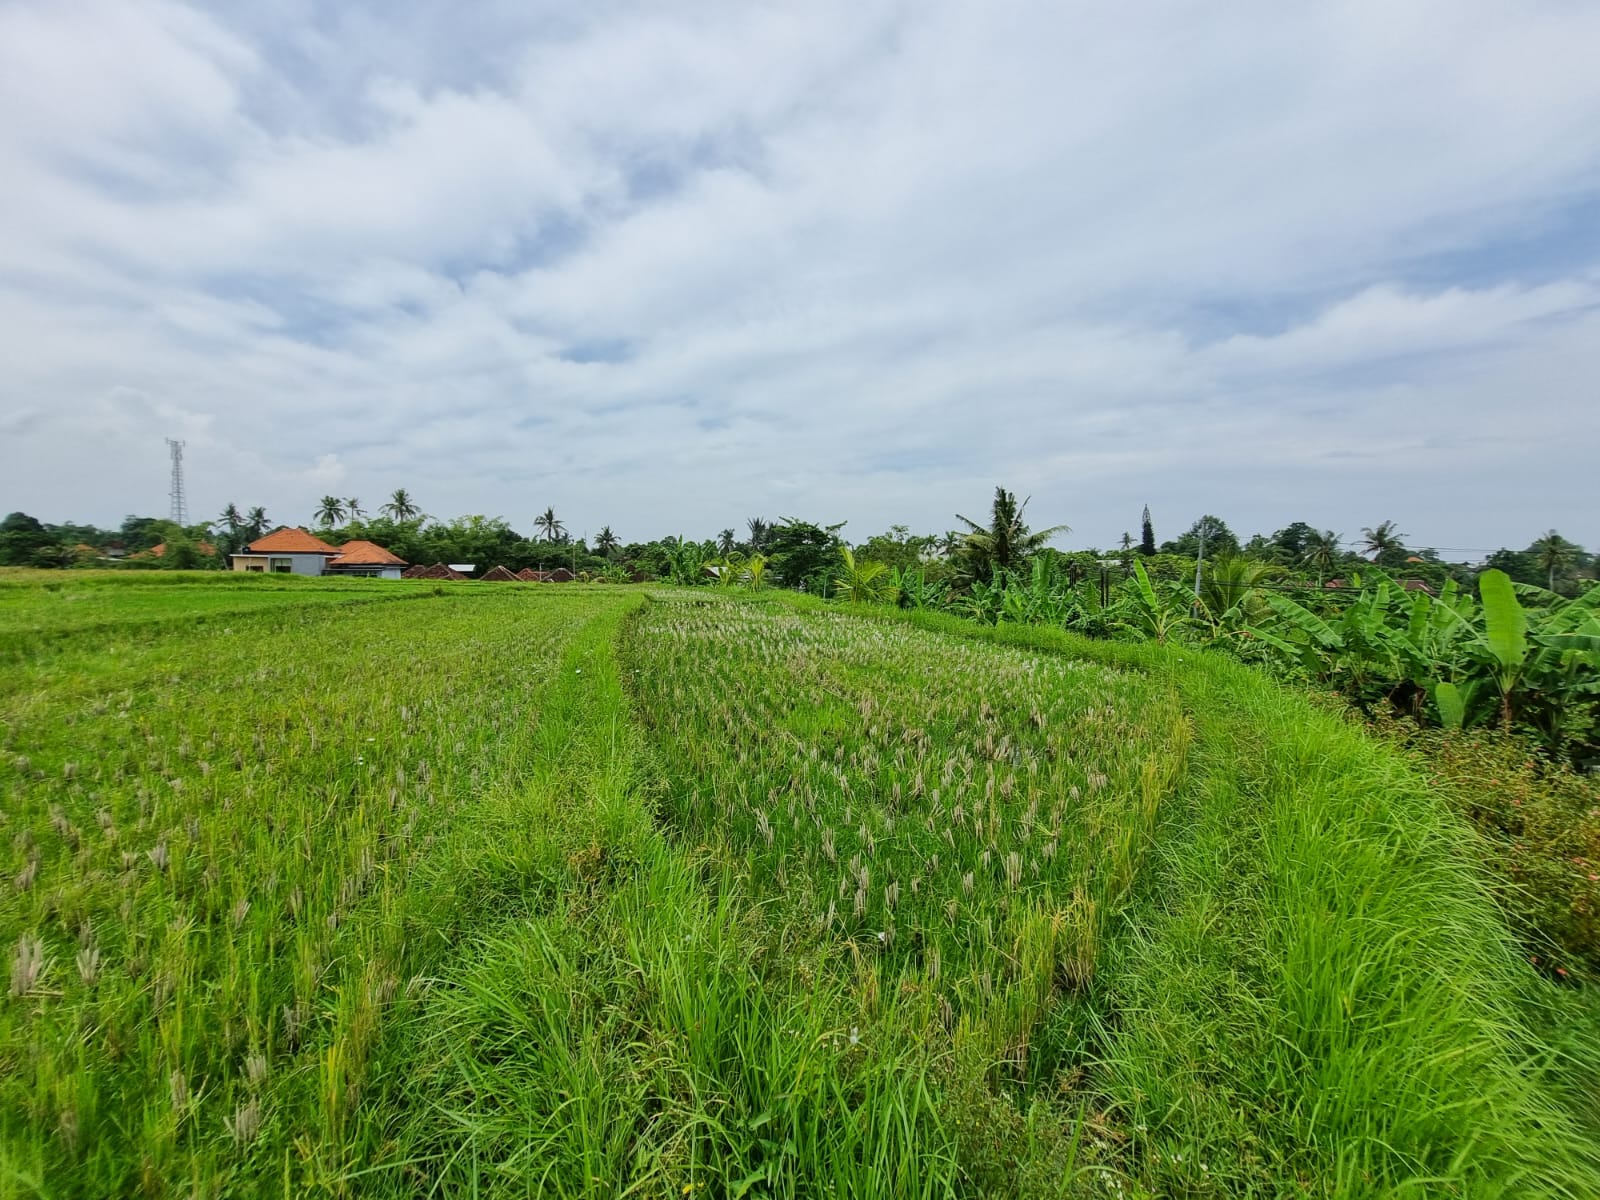 Land For Sale: 20 Are – Sibang Gede